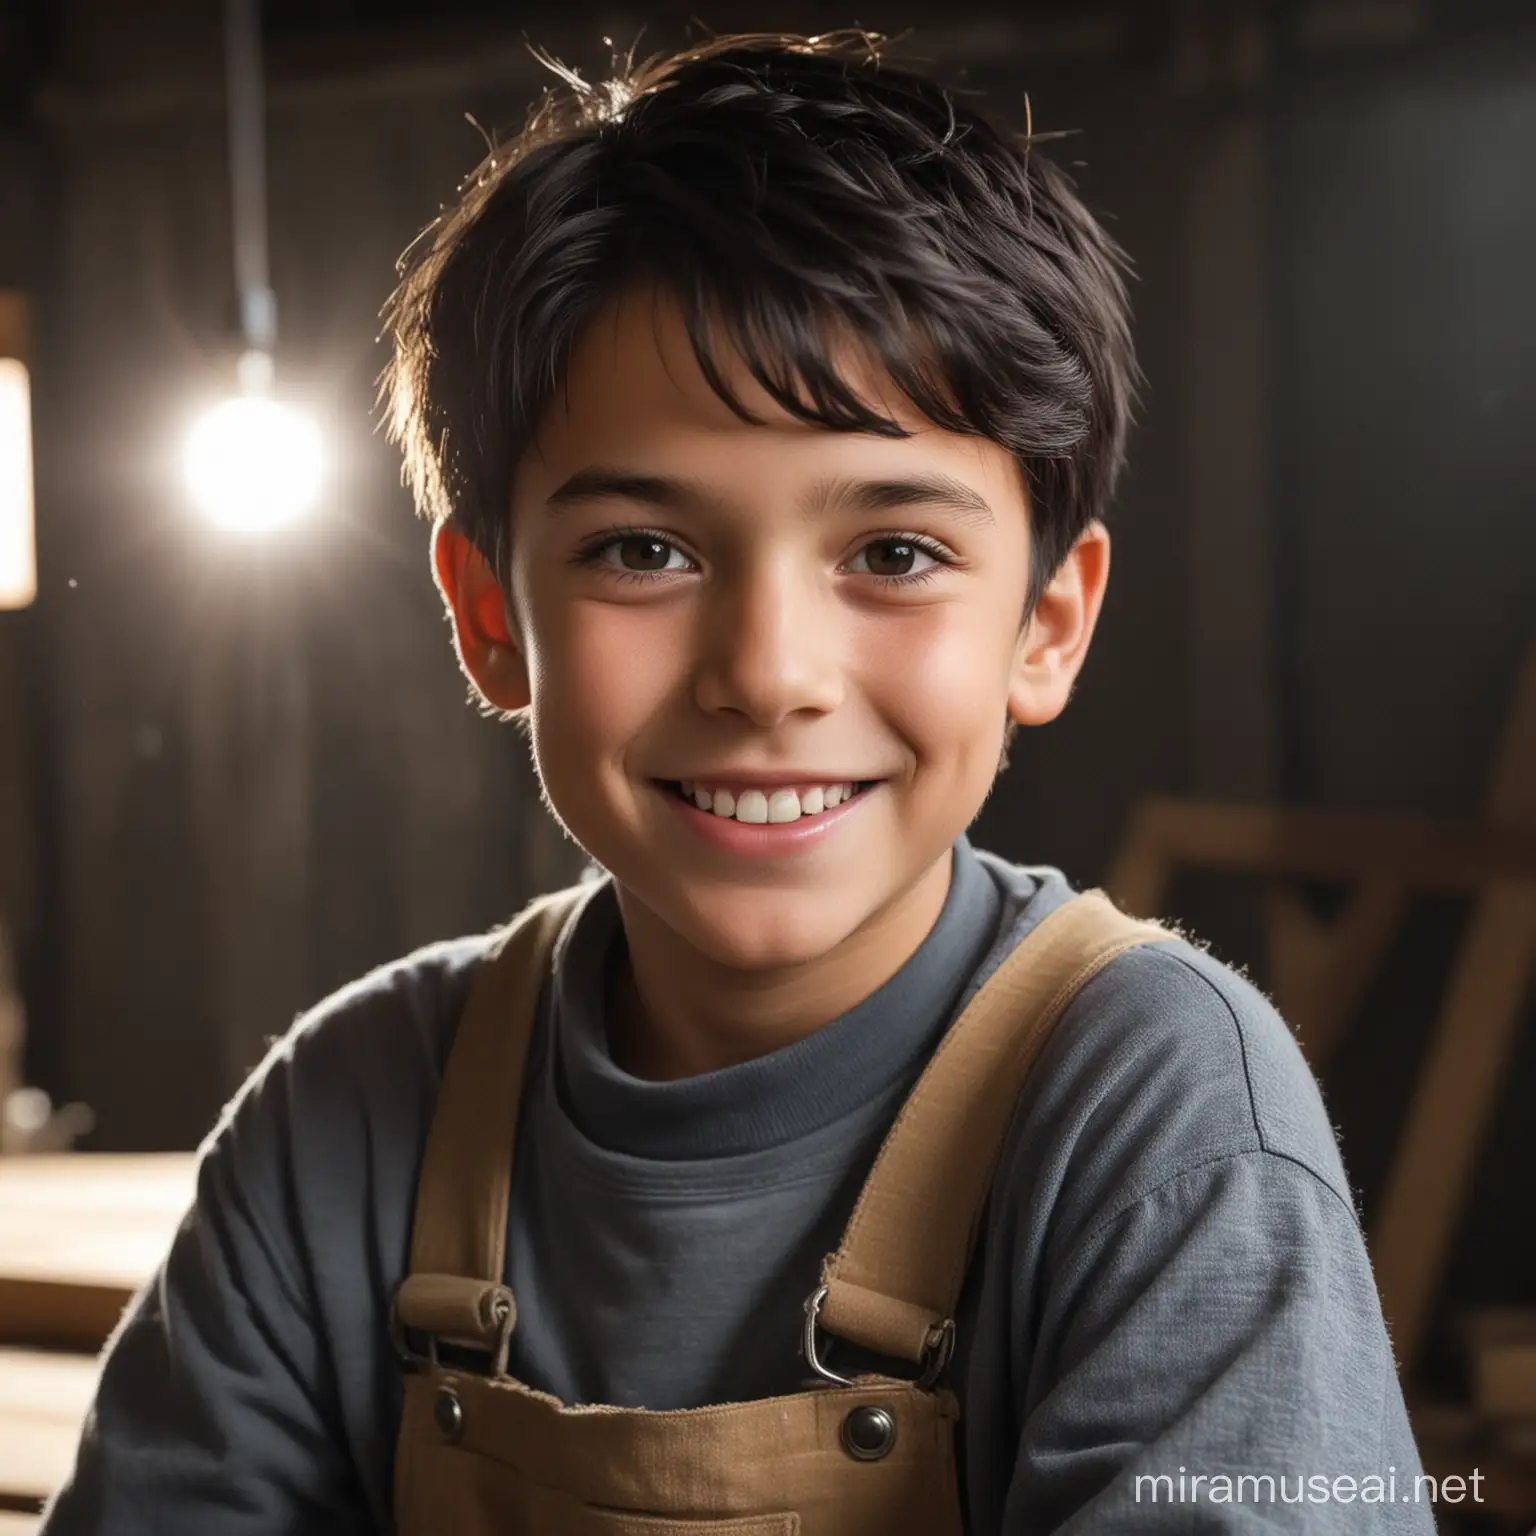 Cheerful Young Boy Carpenter Smiling in Dimly Lit Workshop